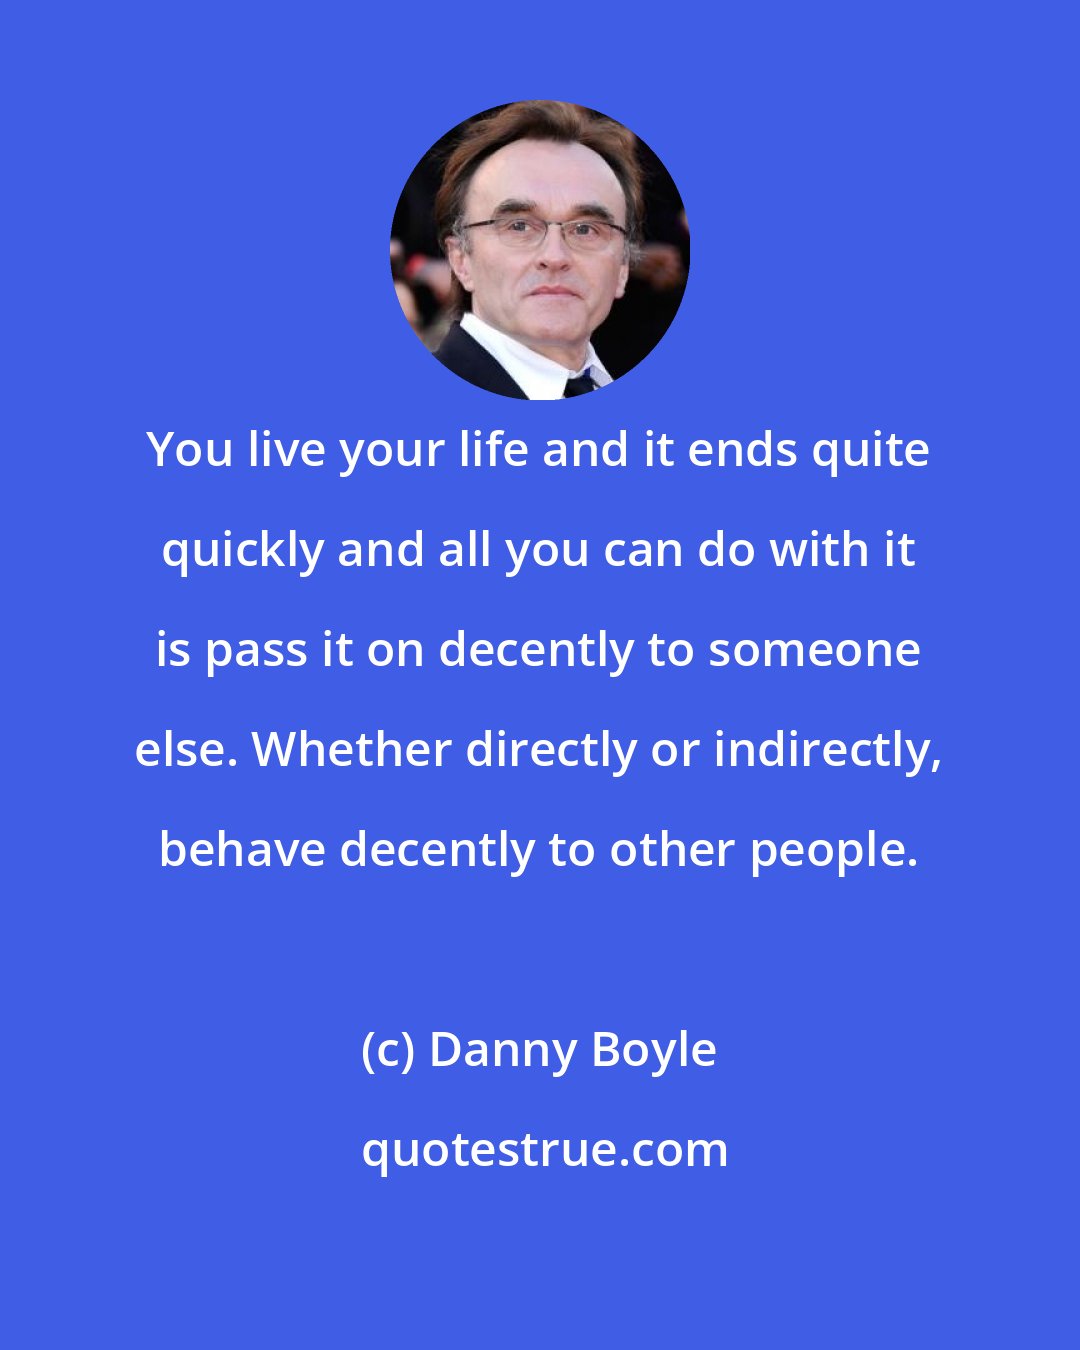 Danny Boyle: You live your life and it ends quite quickly and all you can do with it is pass it on decently to someone else. Whether directly or indirectly, behave decently to other people.